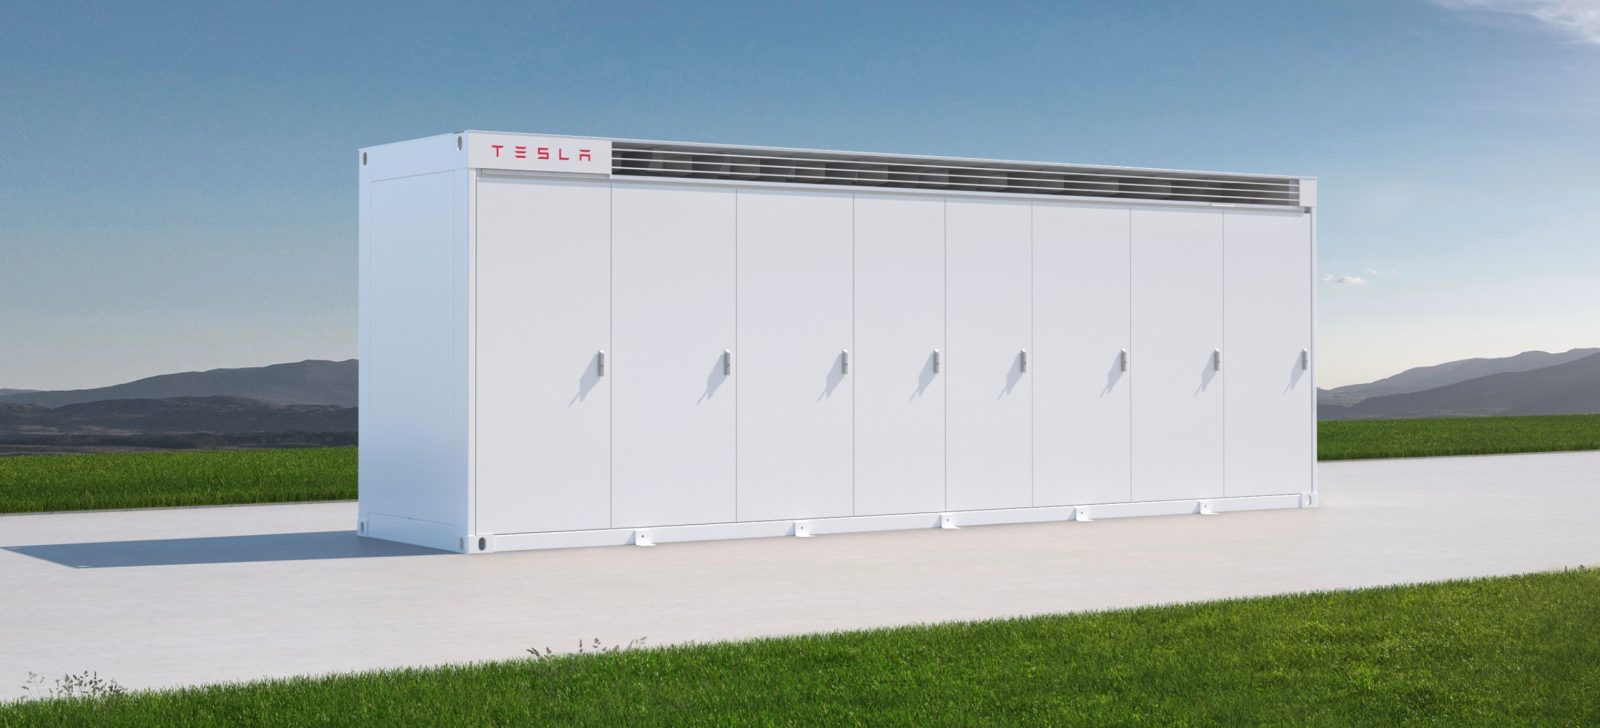 Tesla’s power storage enterprise is booming, and it is just the start